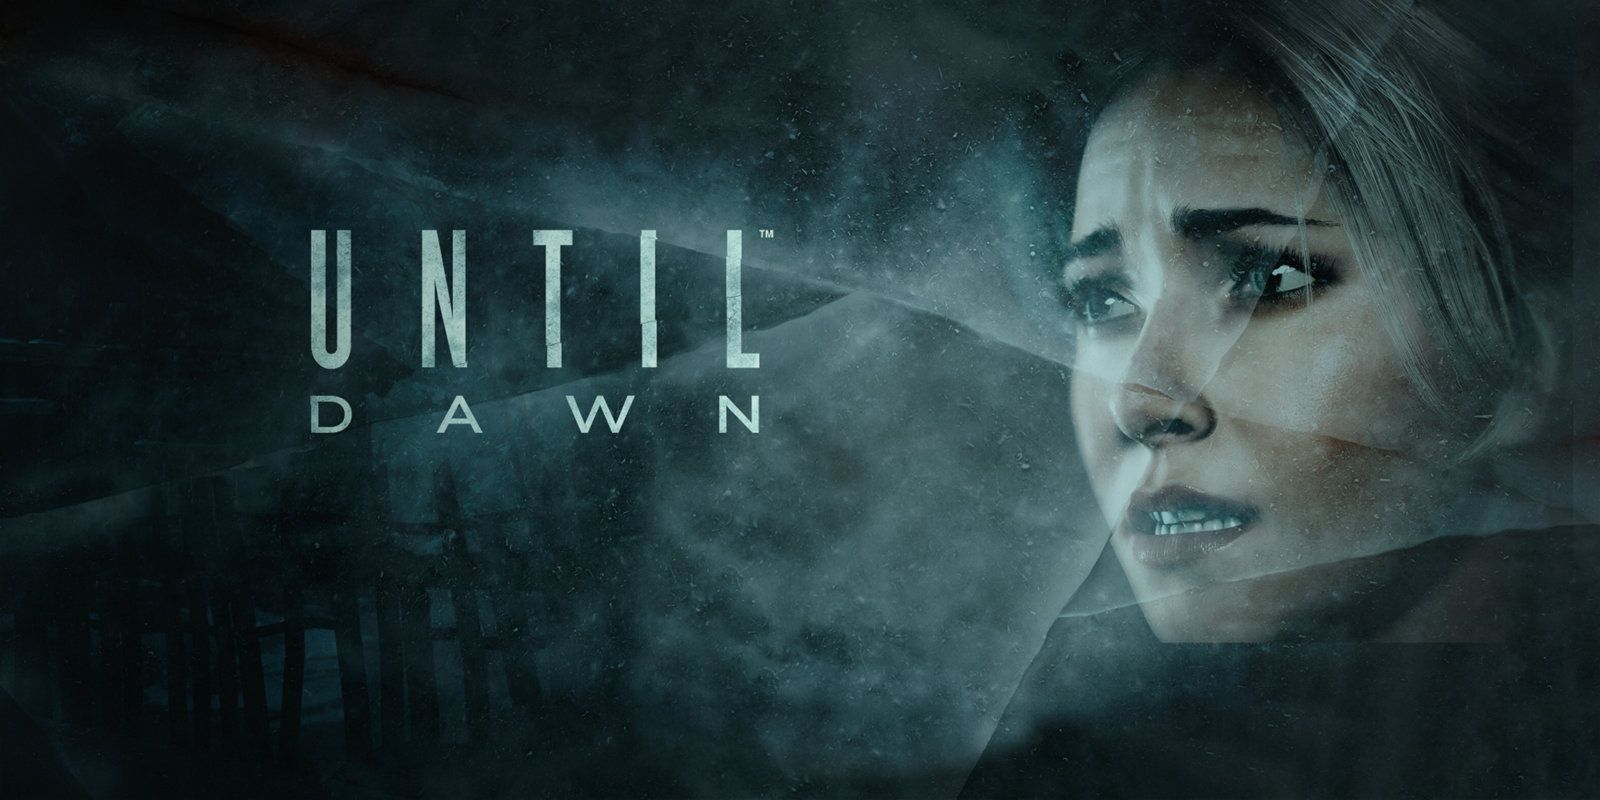 Character from Until Dawn